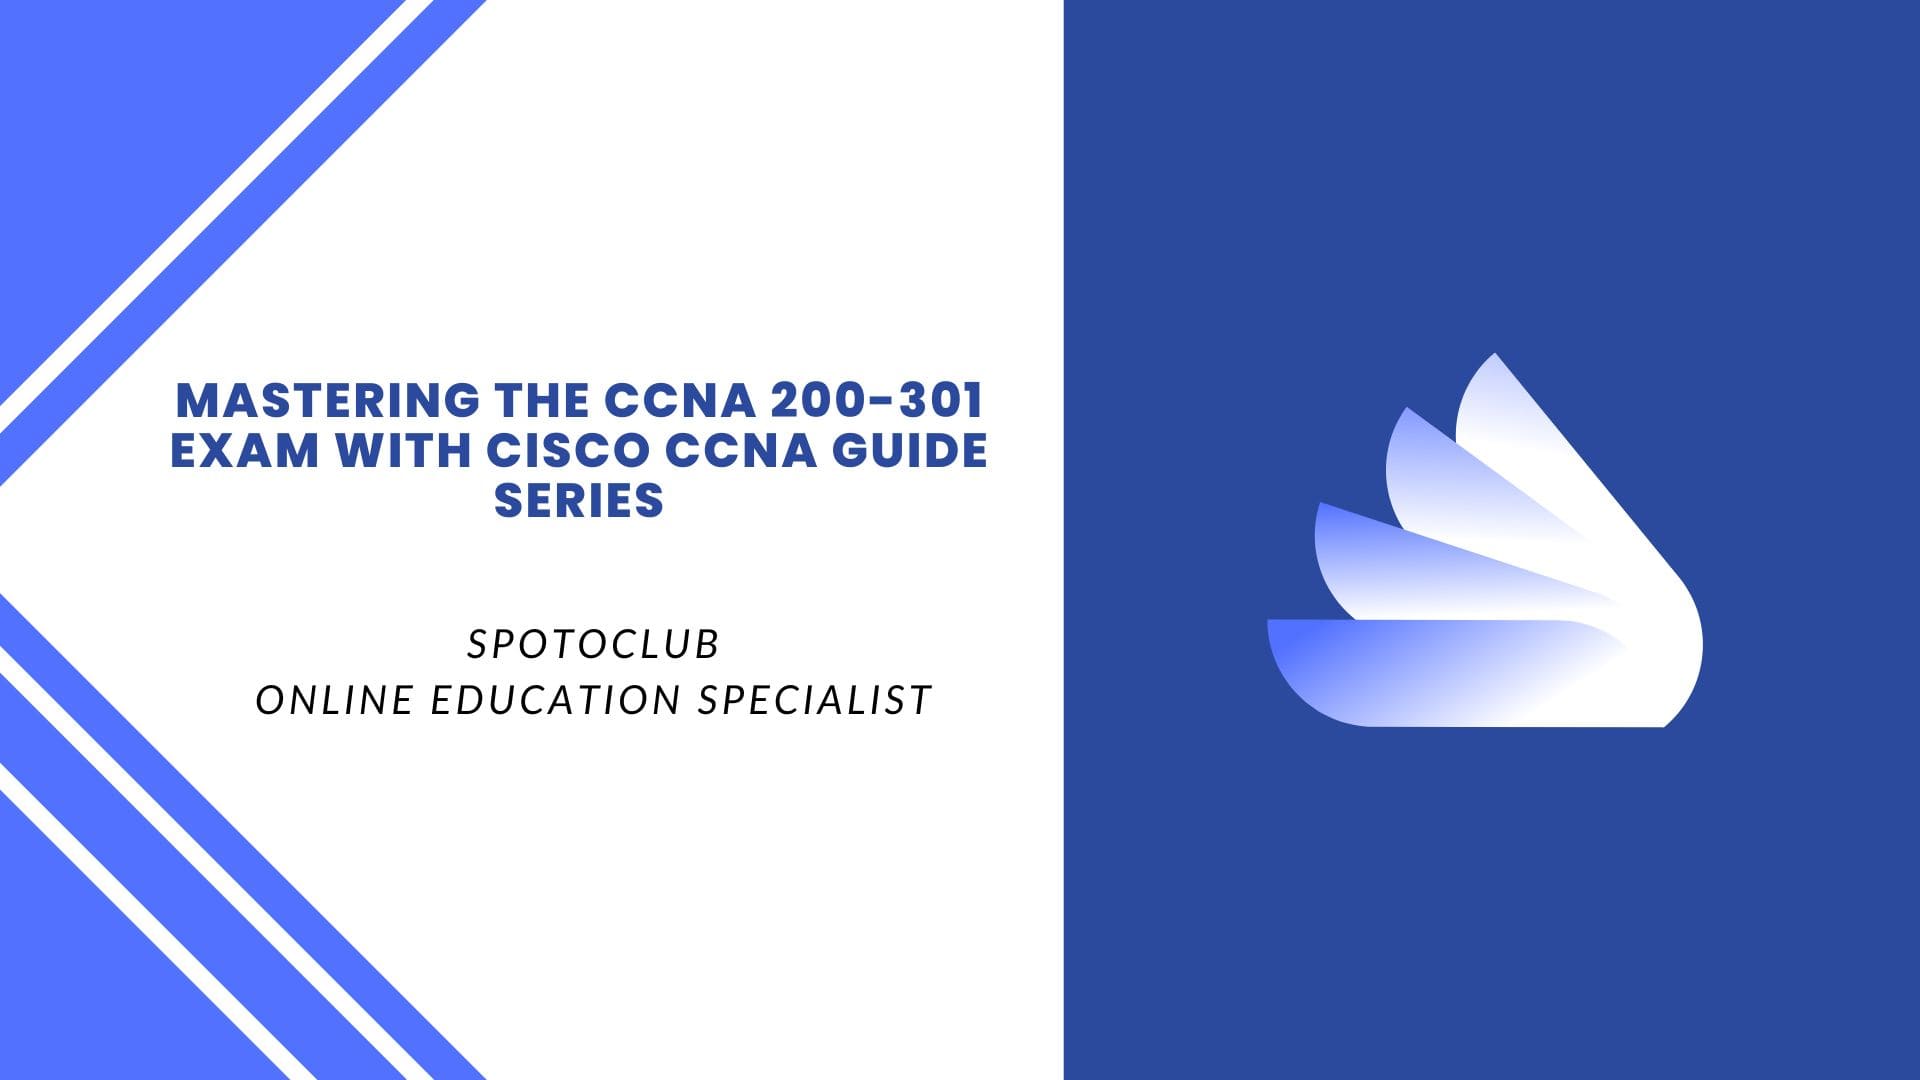 Mastering the CCNA 200-301 Exam with Cisco CCNA Guide Series